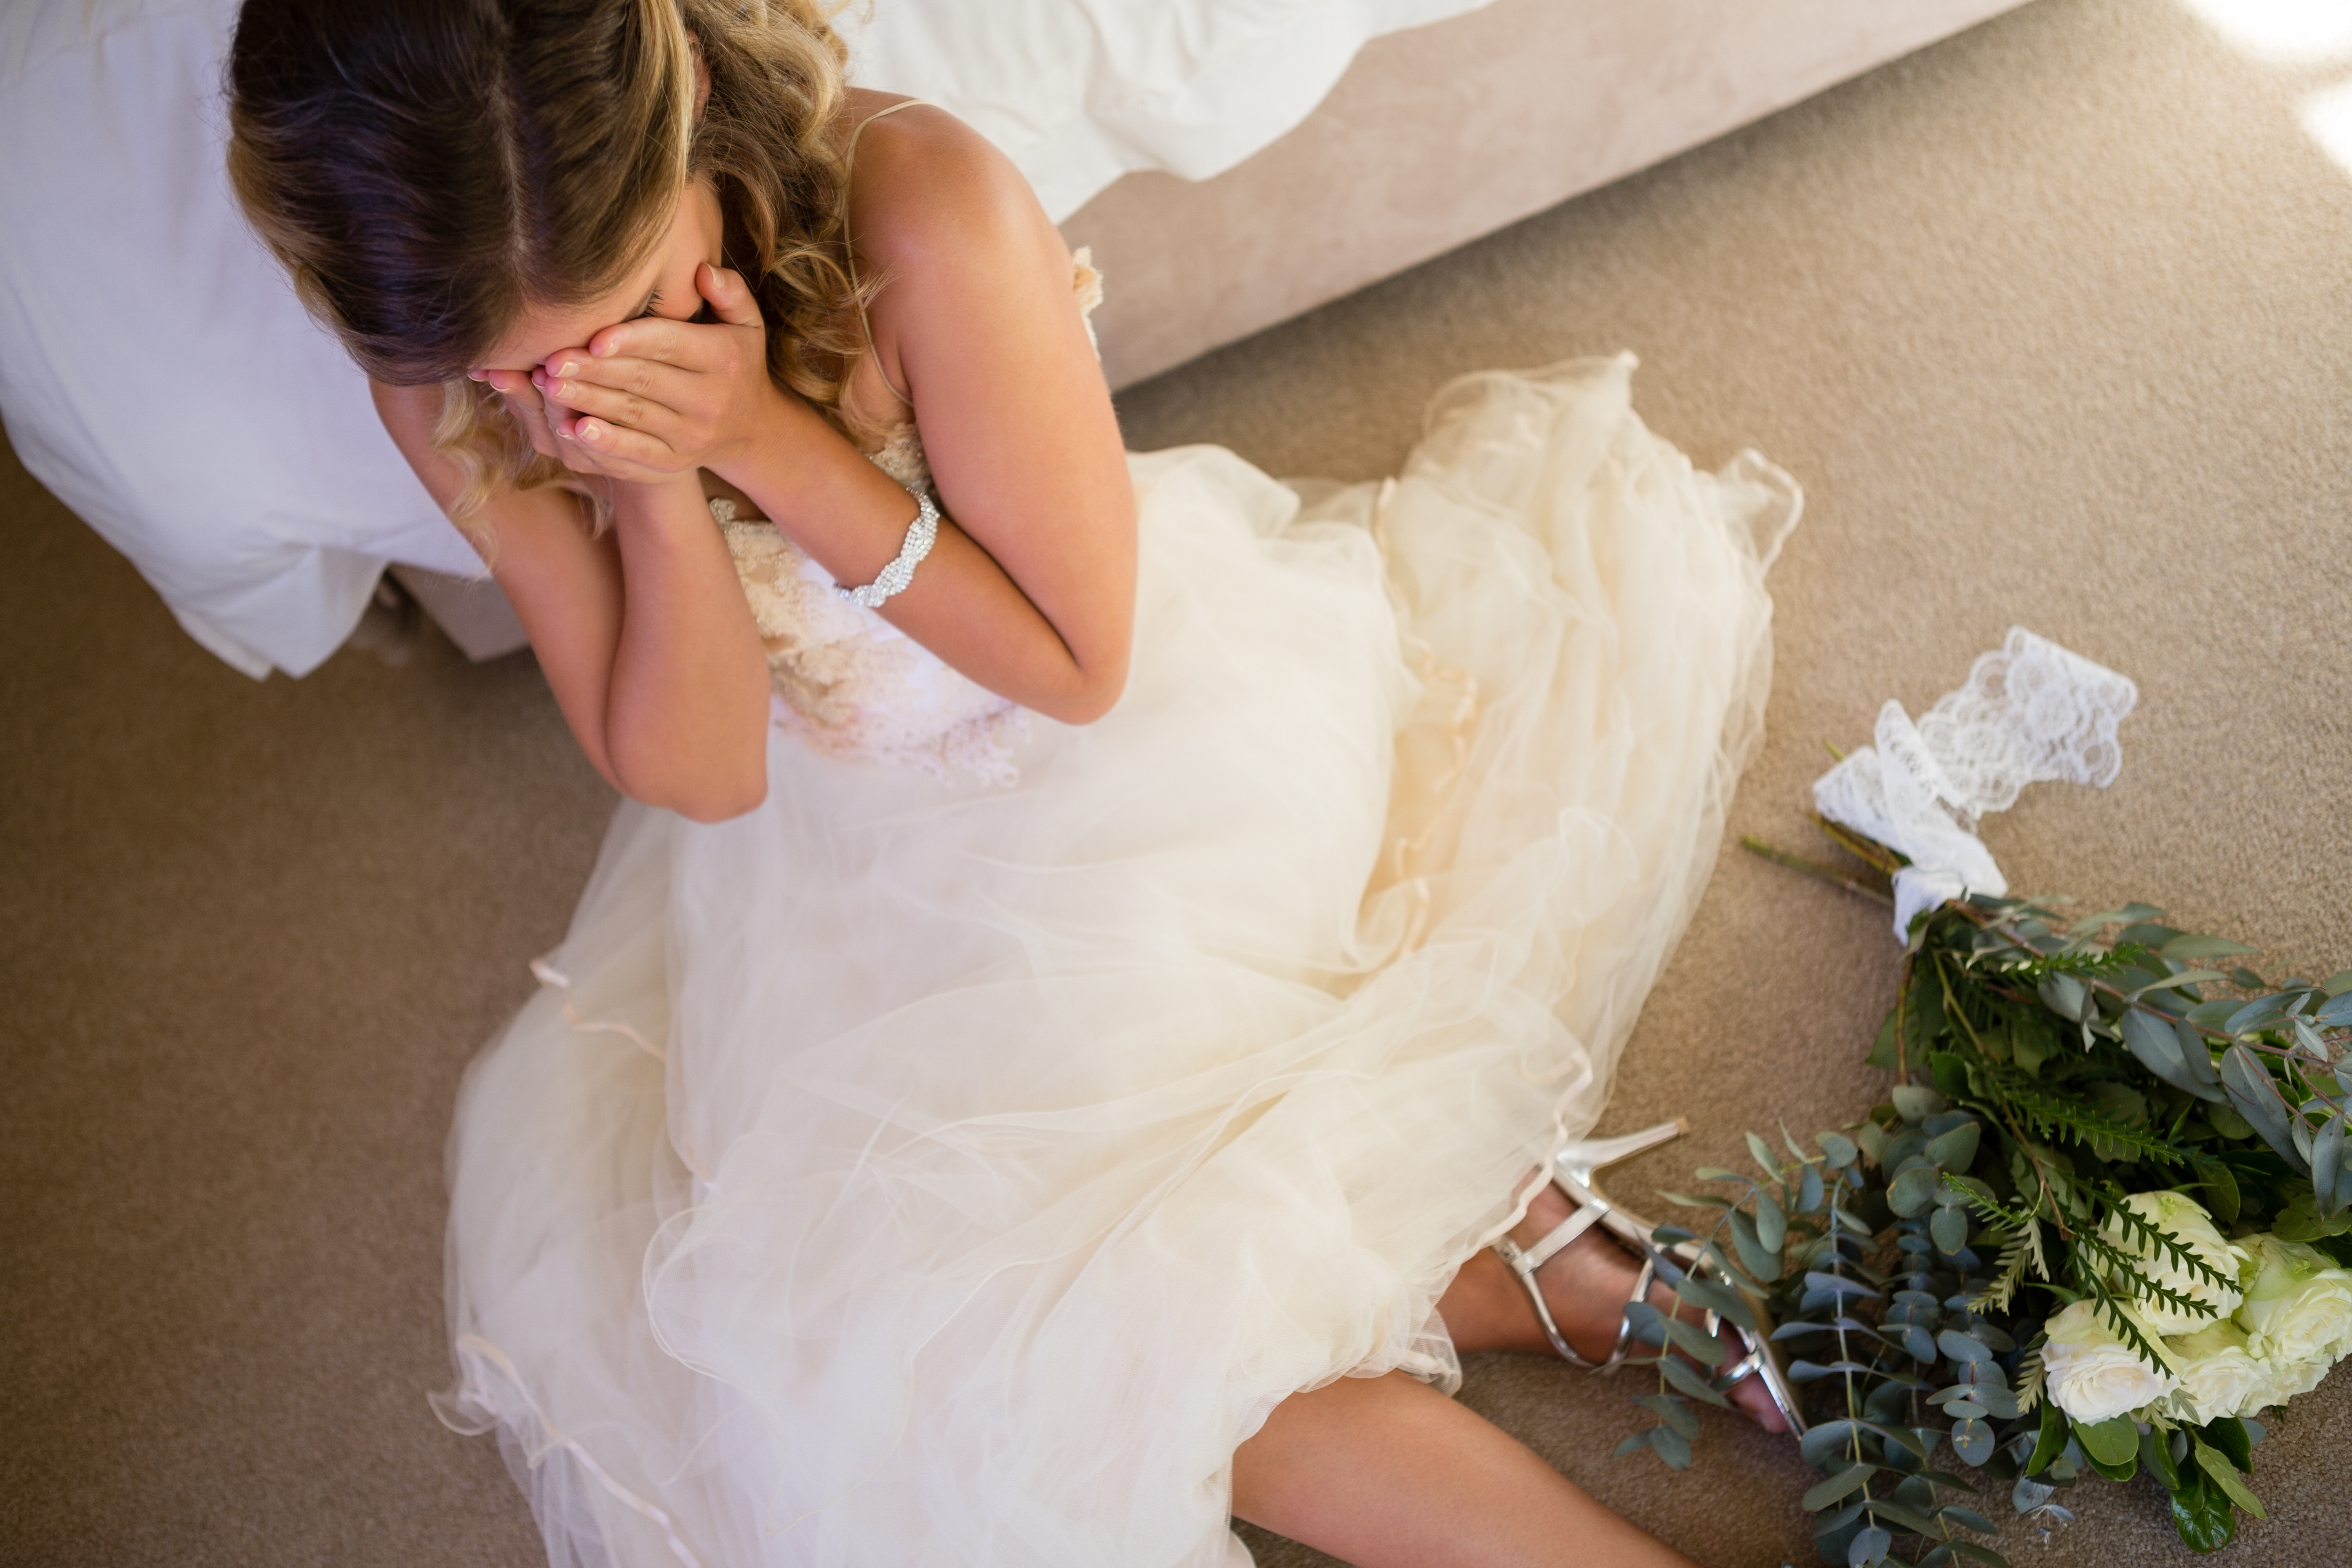 A bride crying on the floor | Source: Shutterstock